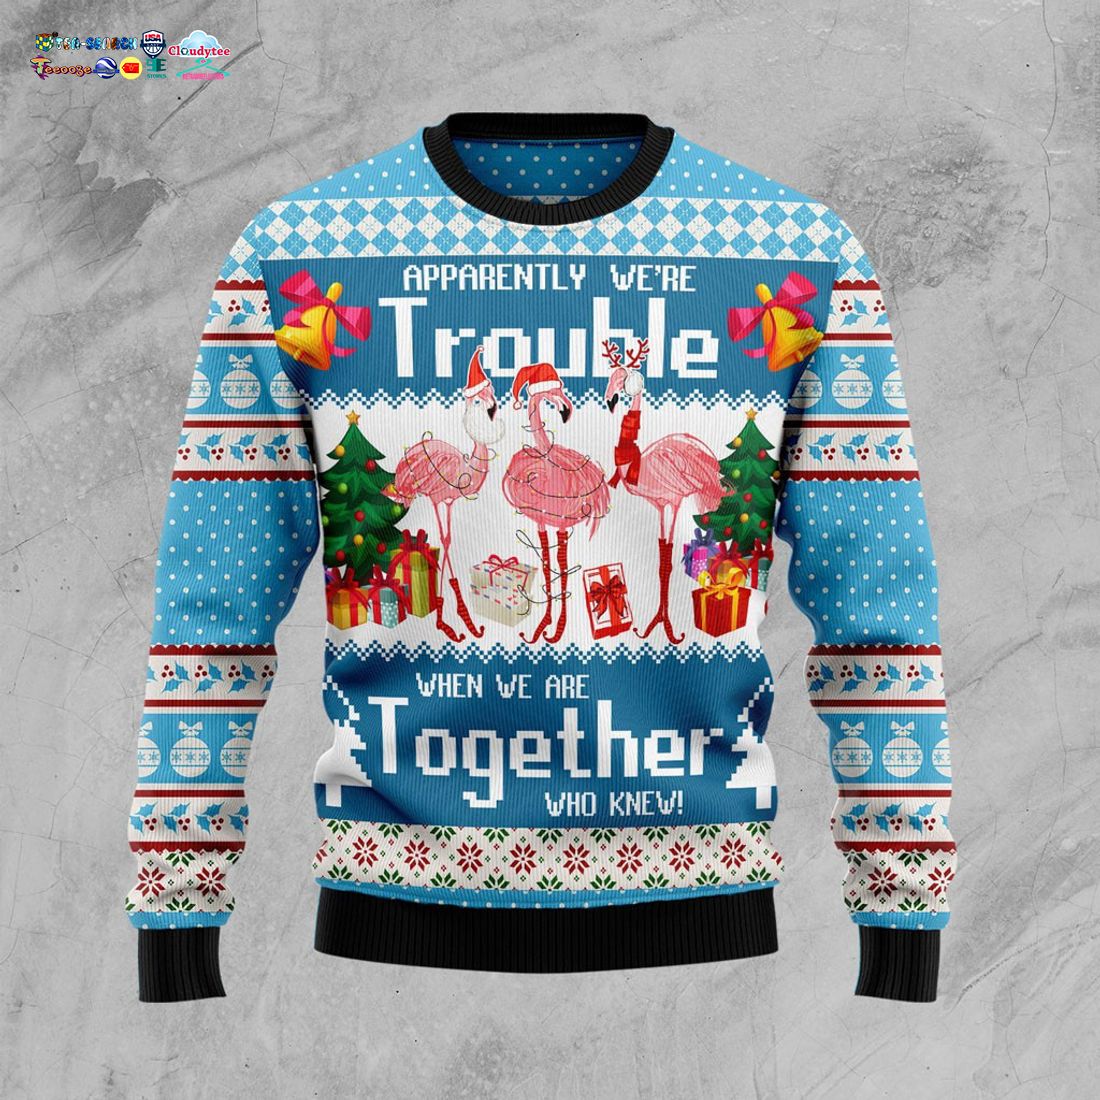 Flamingo Apparently We're Trouble When We Are Together Who Knew Ugly Christmas Sweater